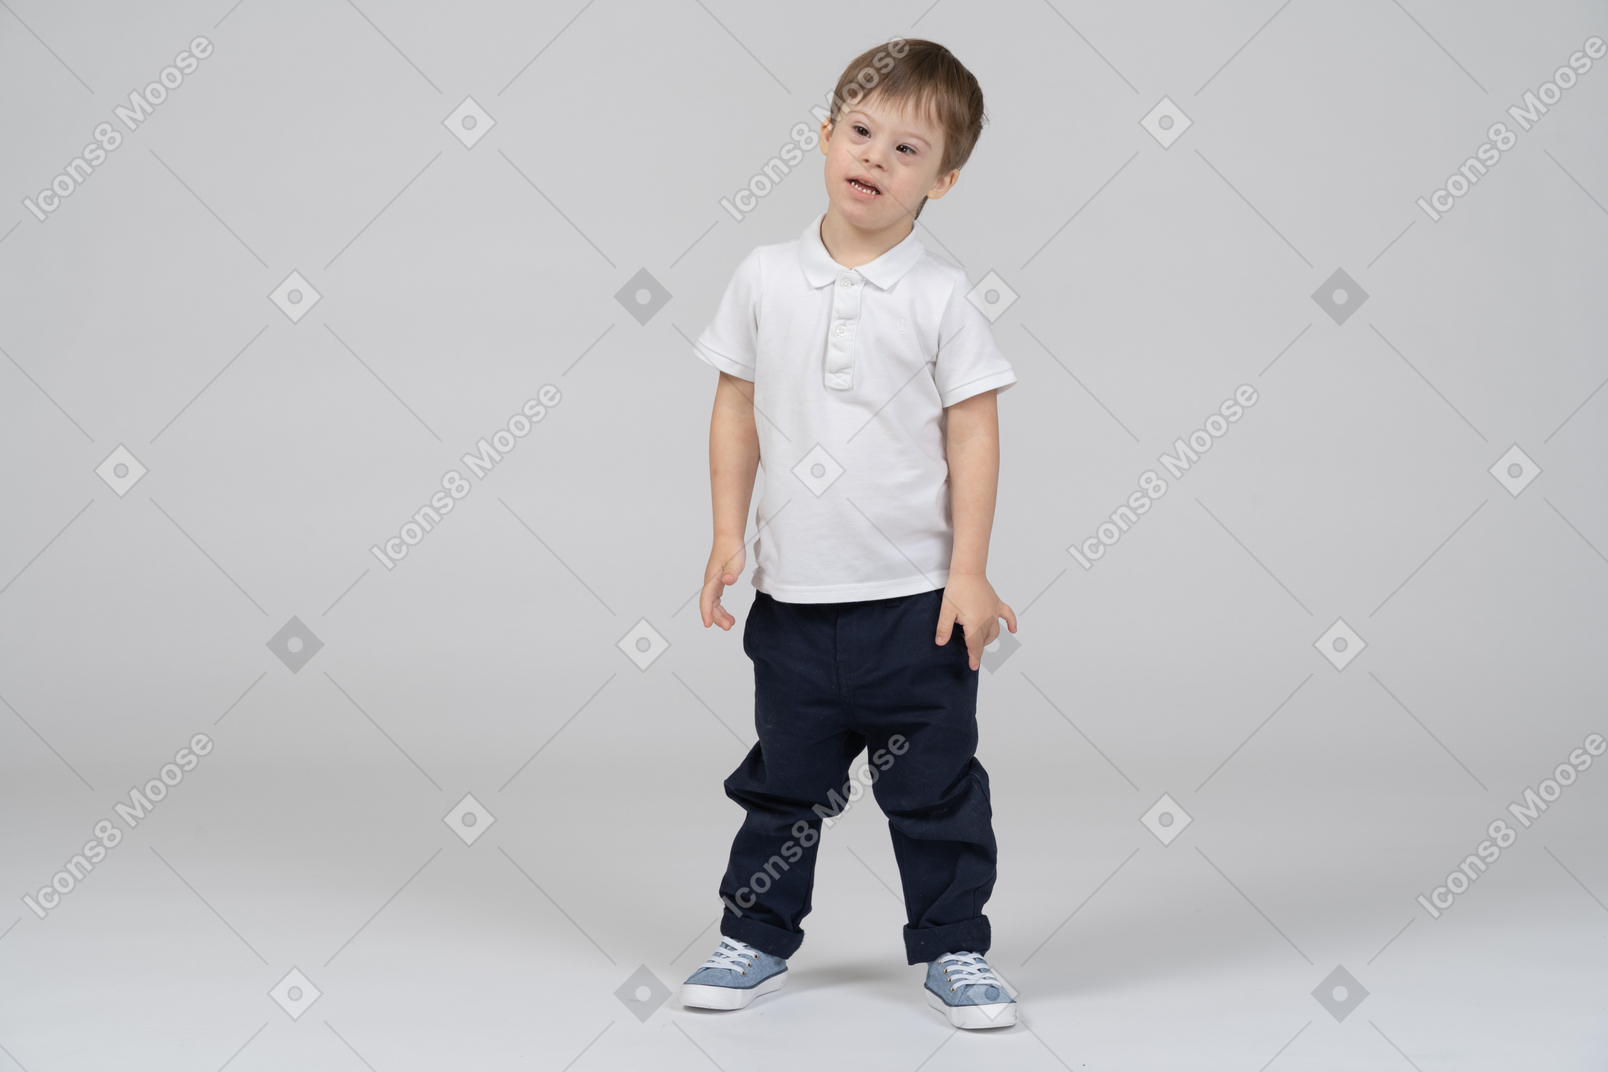 Little boy standing with arms at sides